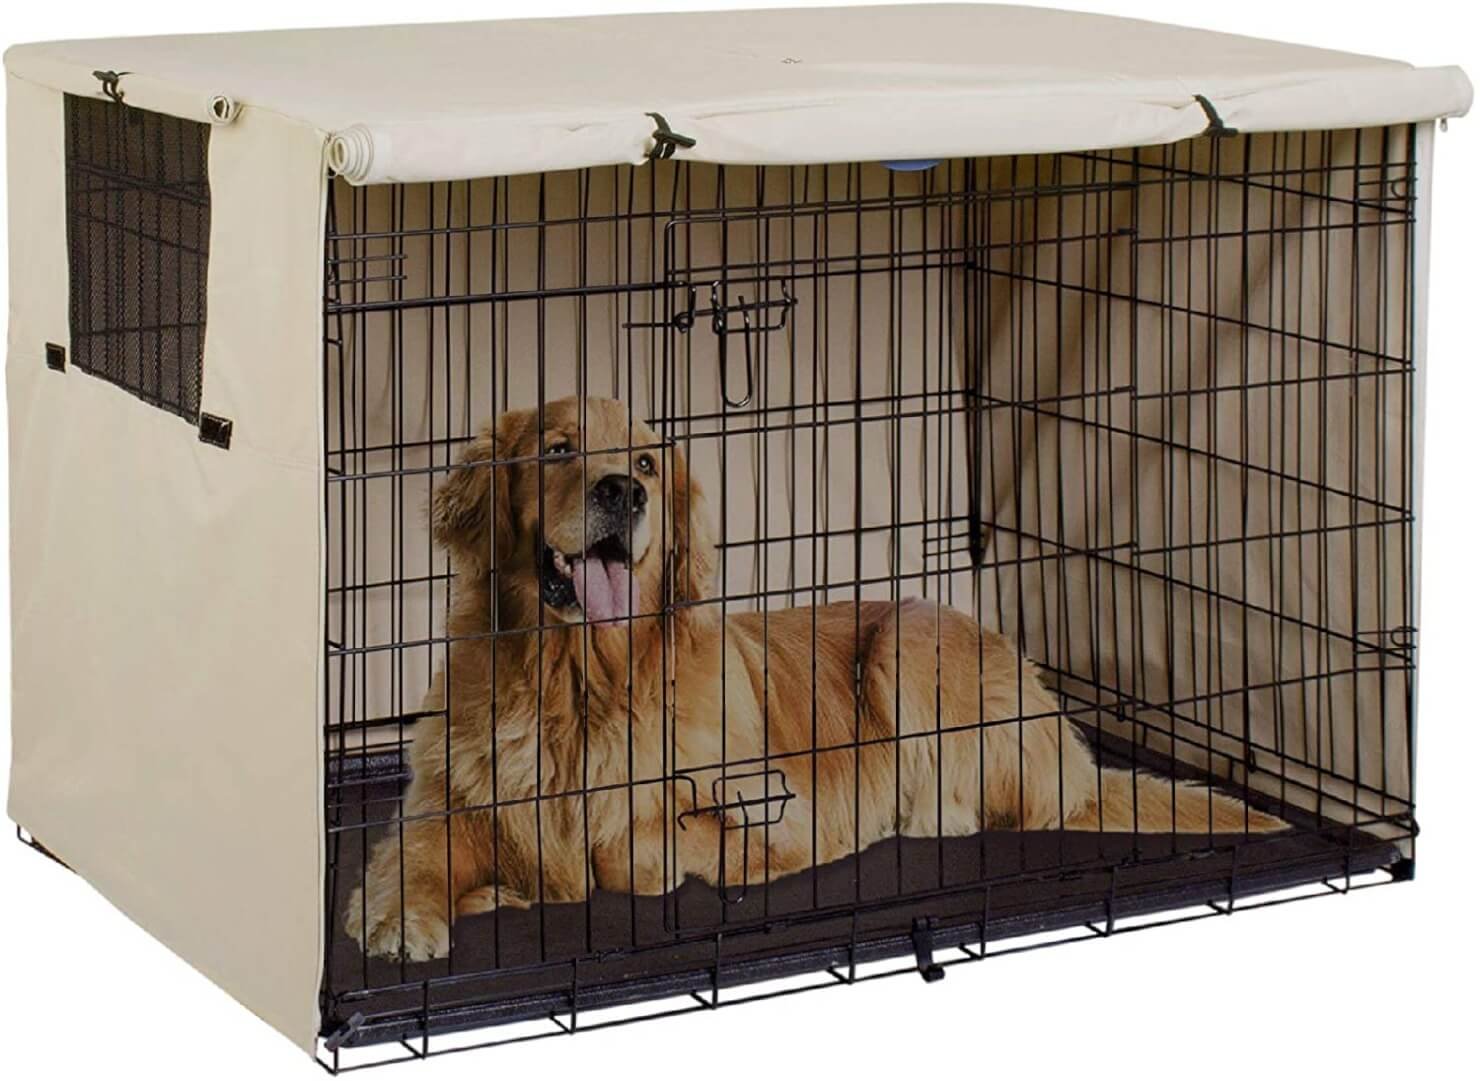 with Double Door and Mesh Window Pet Kennel Cover for Medium and Large Wire Dog Crate TUYUU Dog Crate Cover,Indoor/Outdoor Durable Waterproof Kennel Covers 